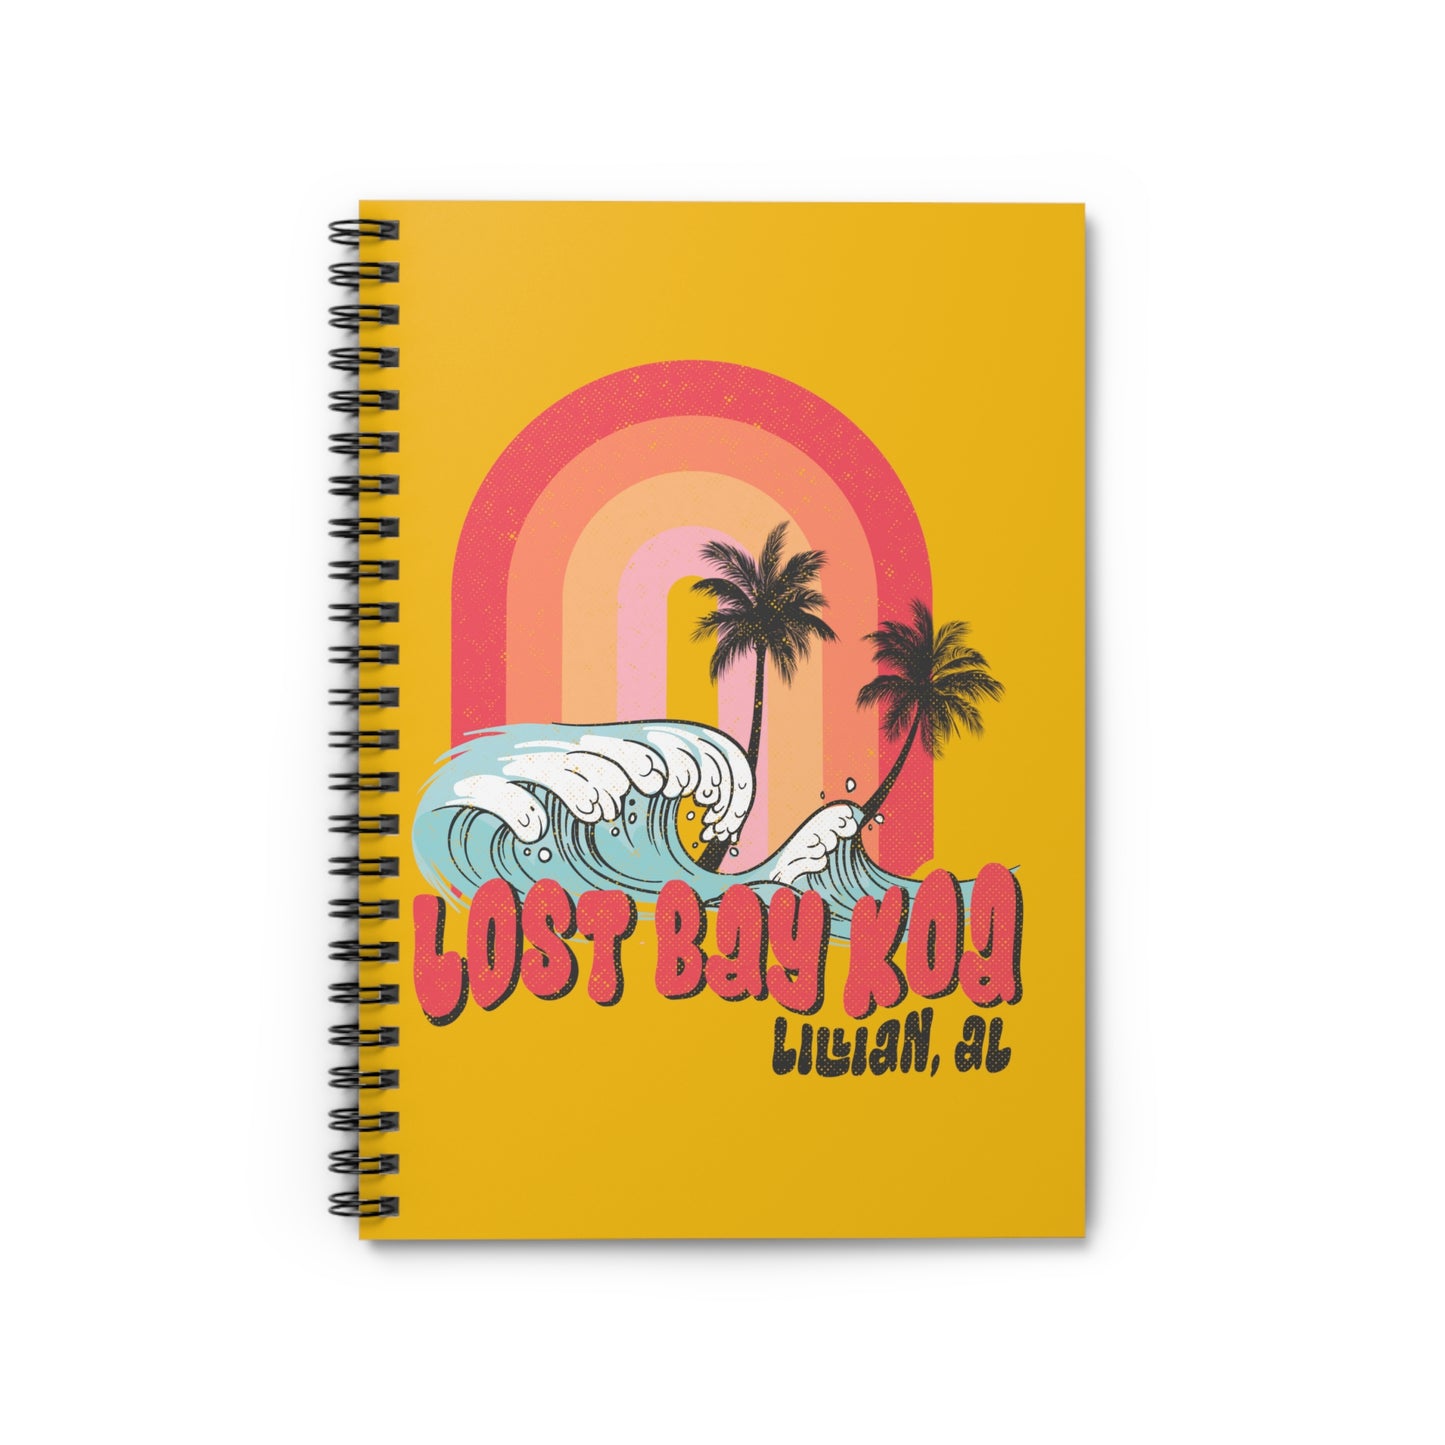 Lost Bay Wave- Spiral Notebook - Ruled Line